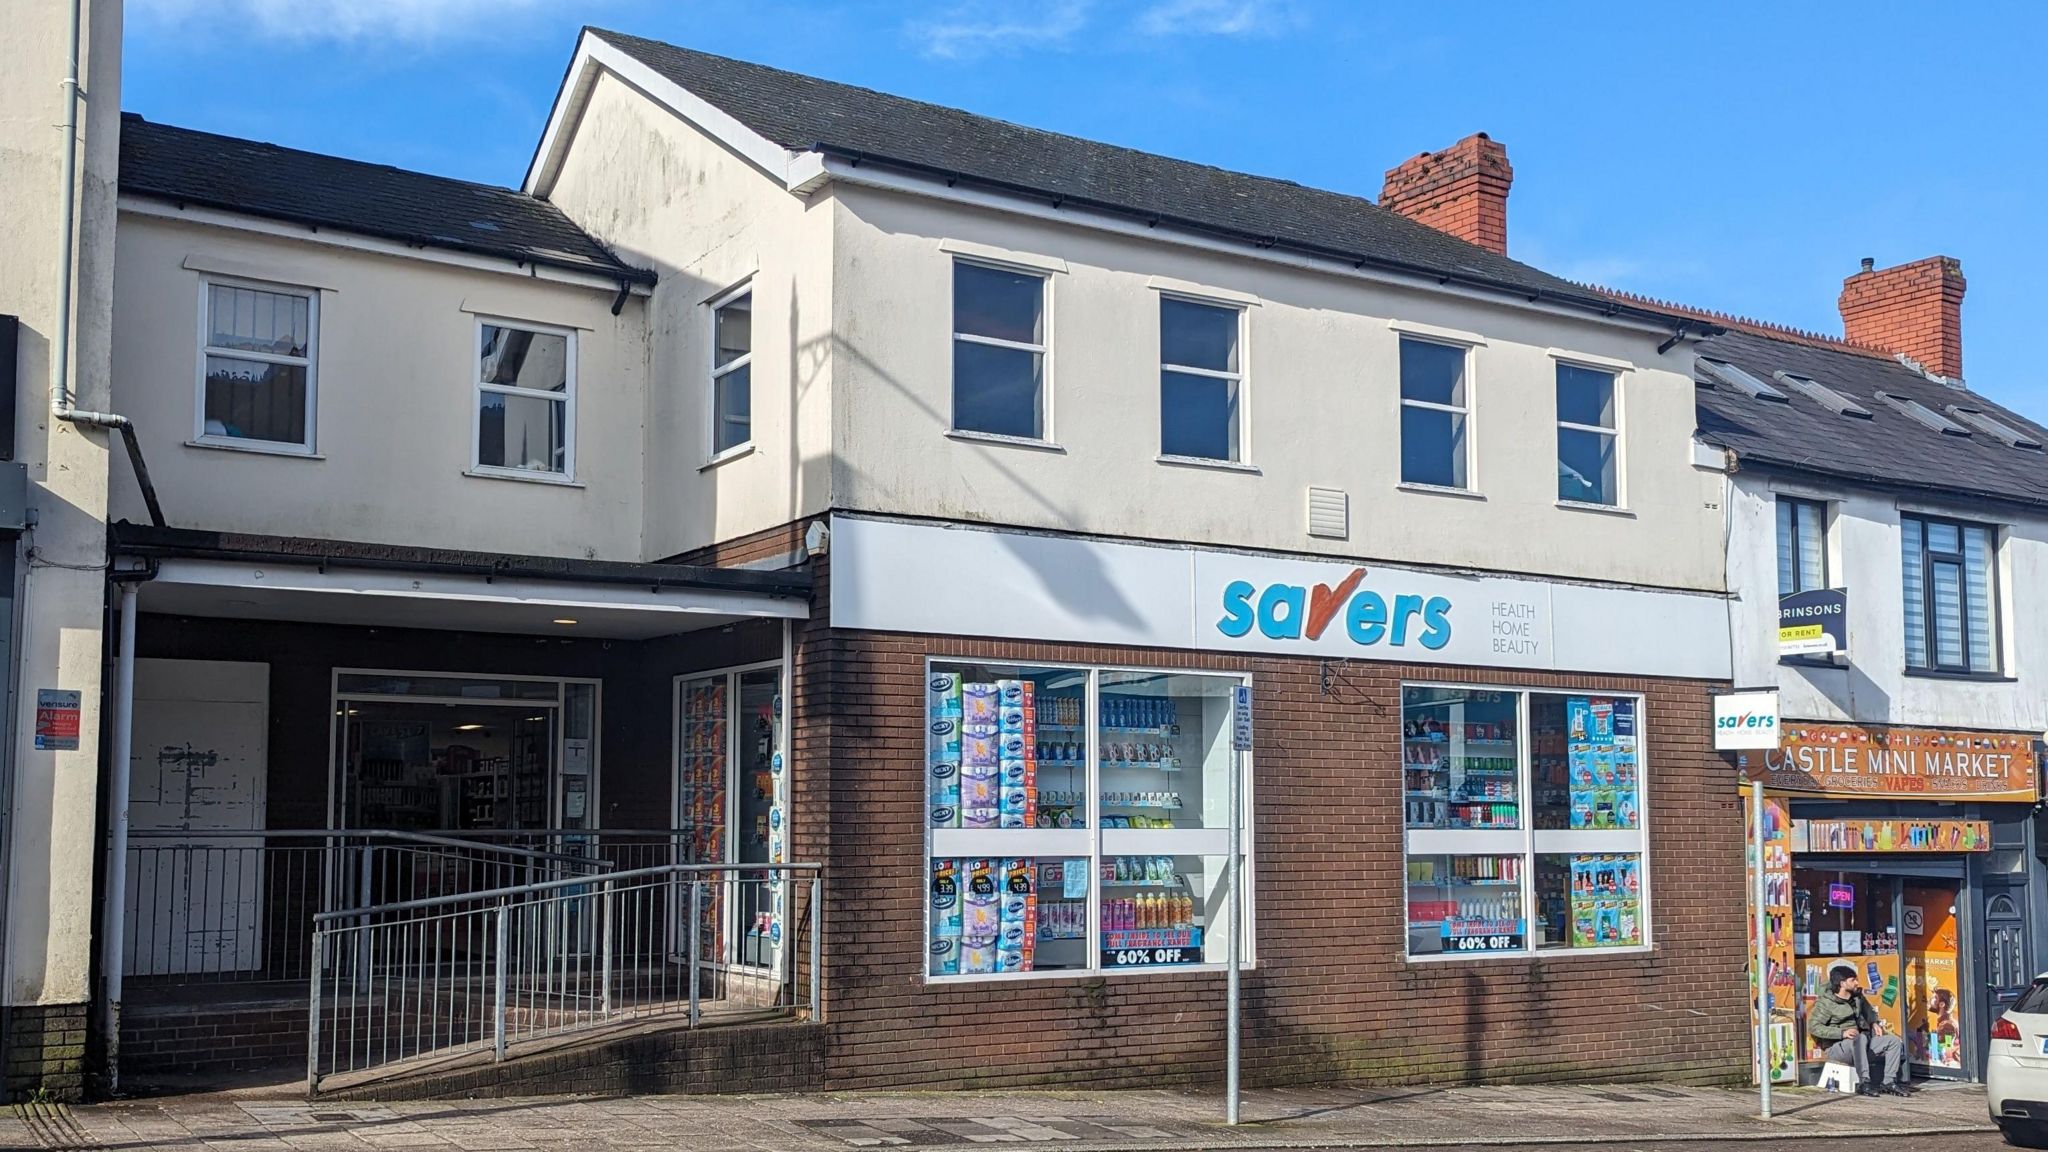 The Savers store in Caerphilly